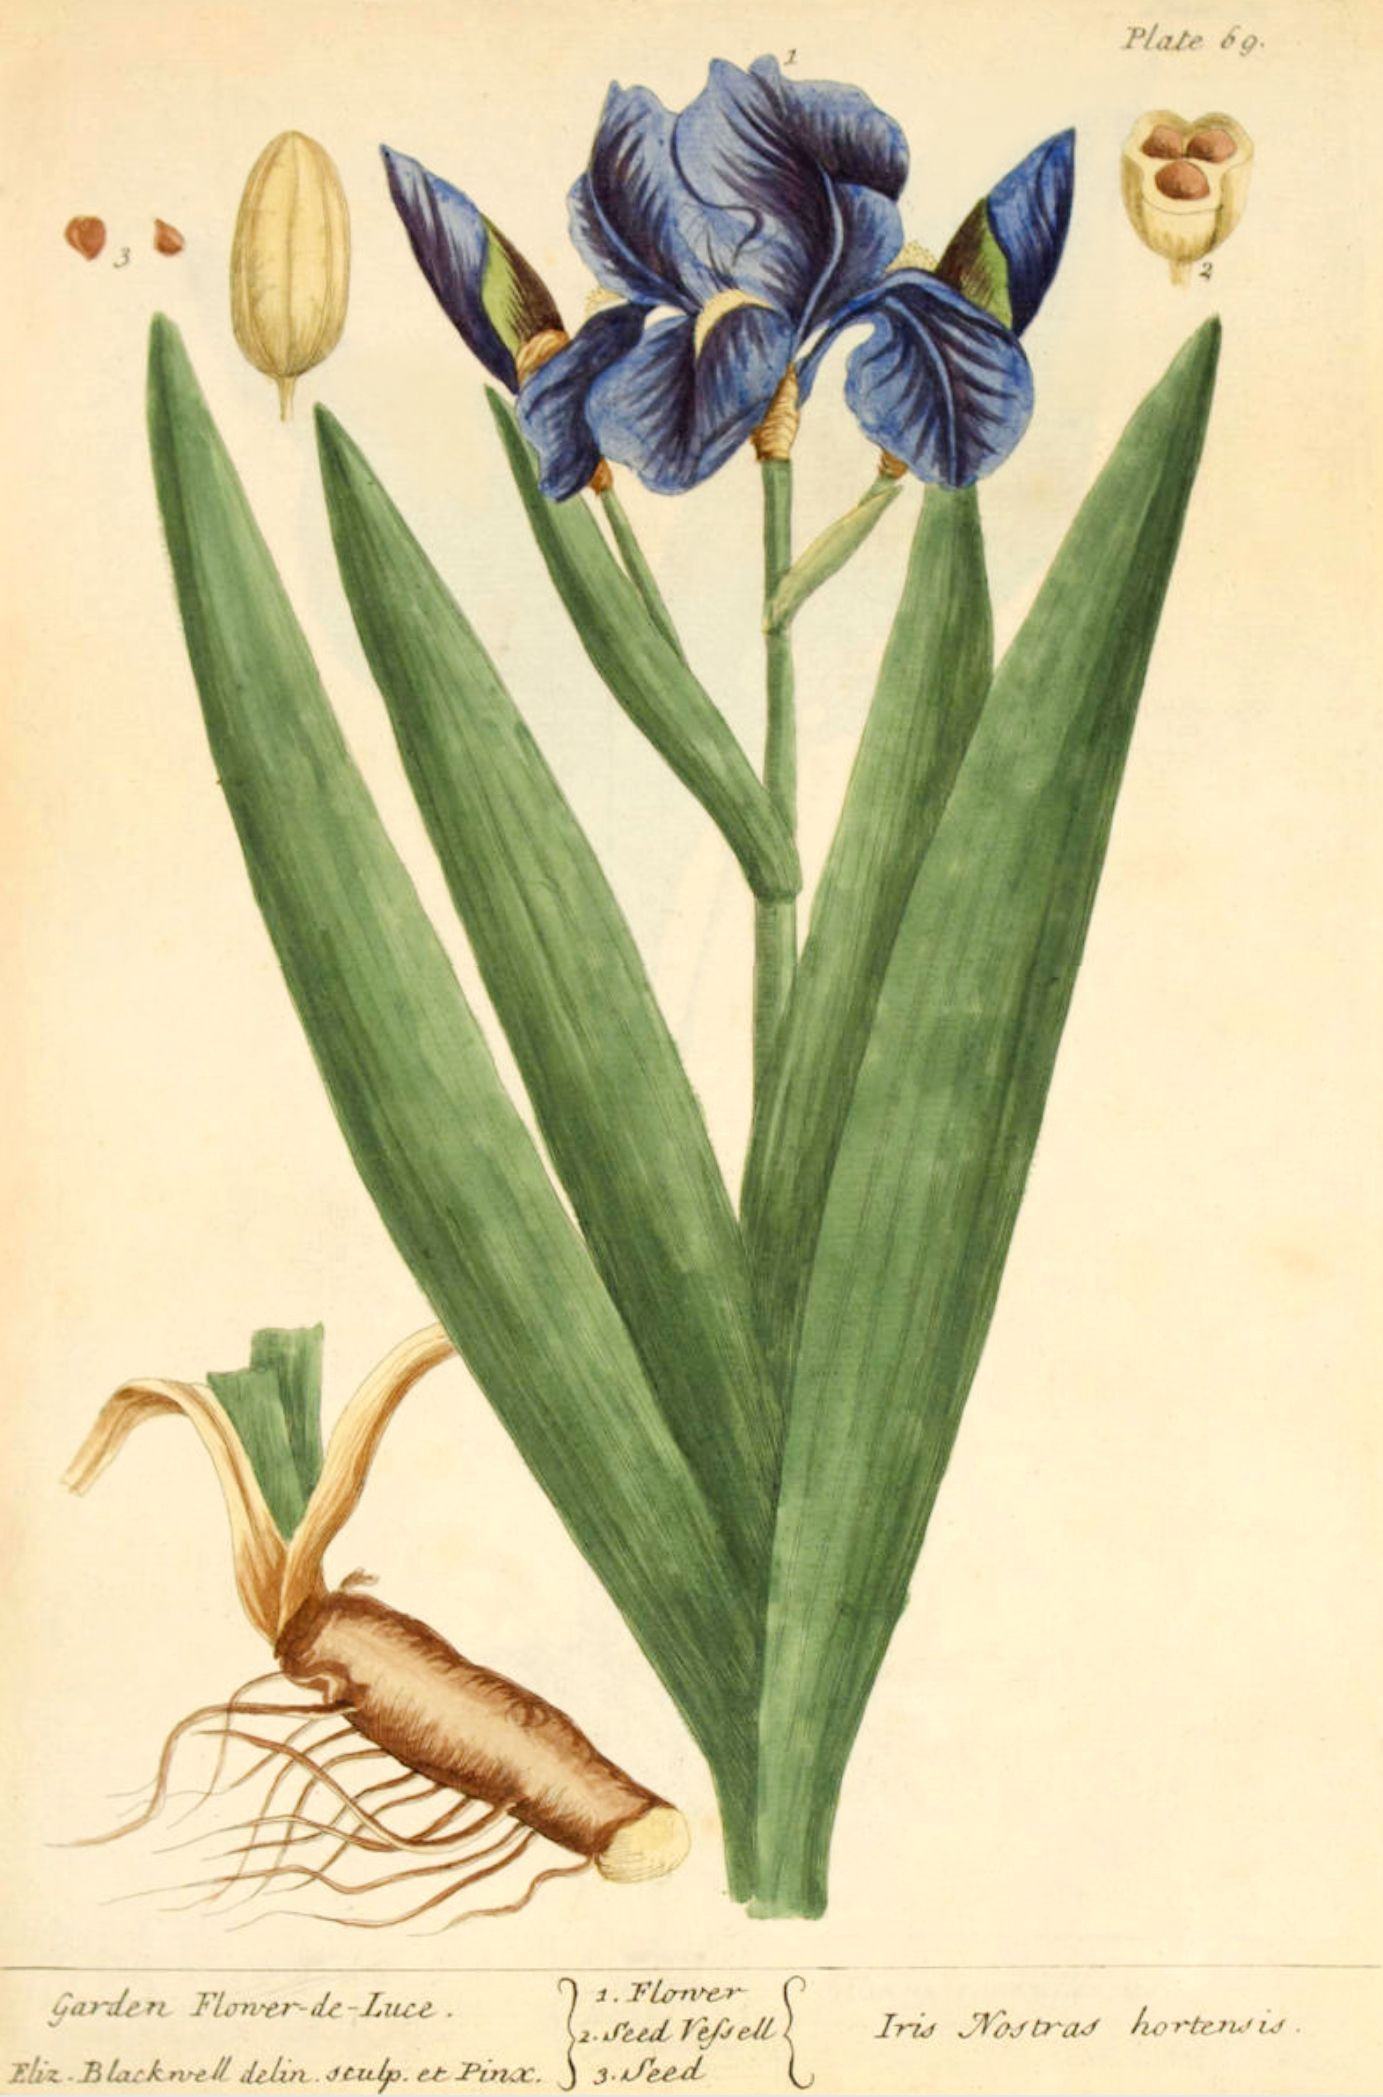 Illustration of an iris from Elizabeth Blackwell's A Curious Herbal